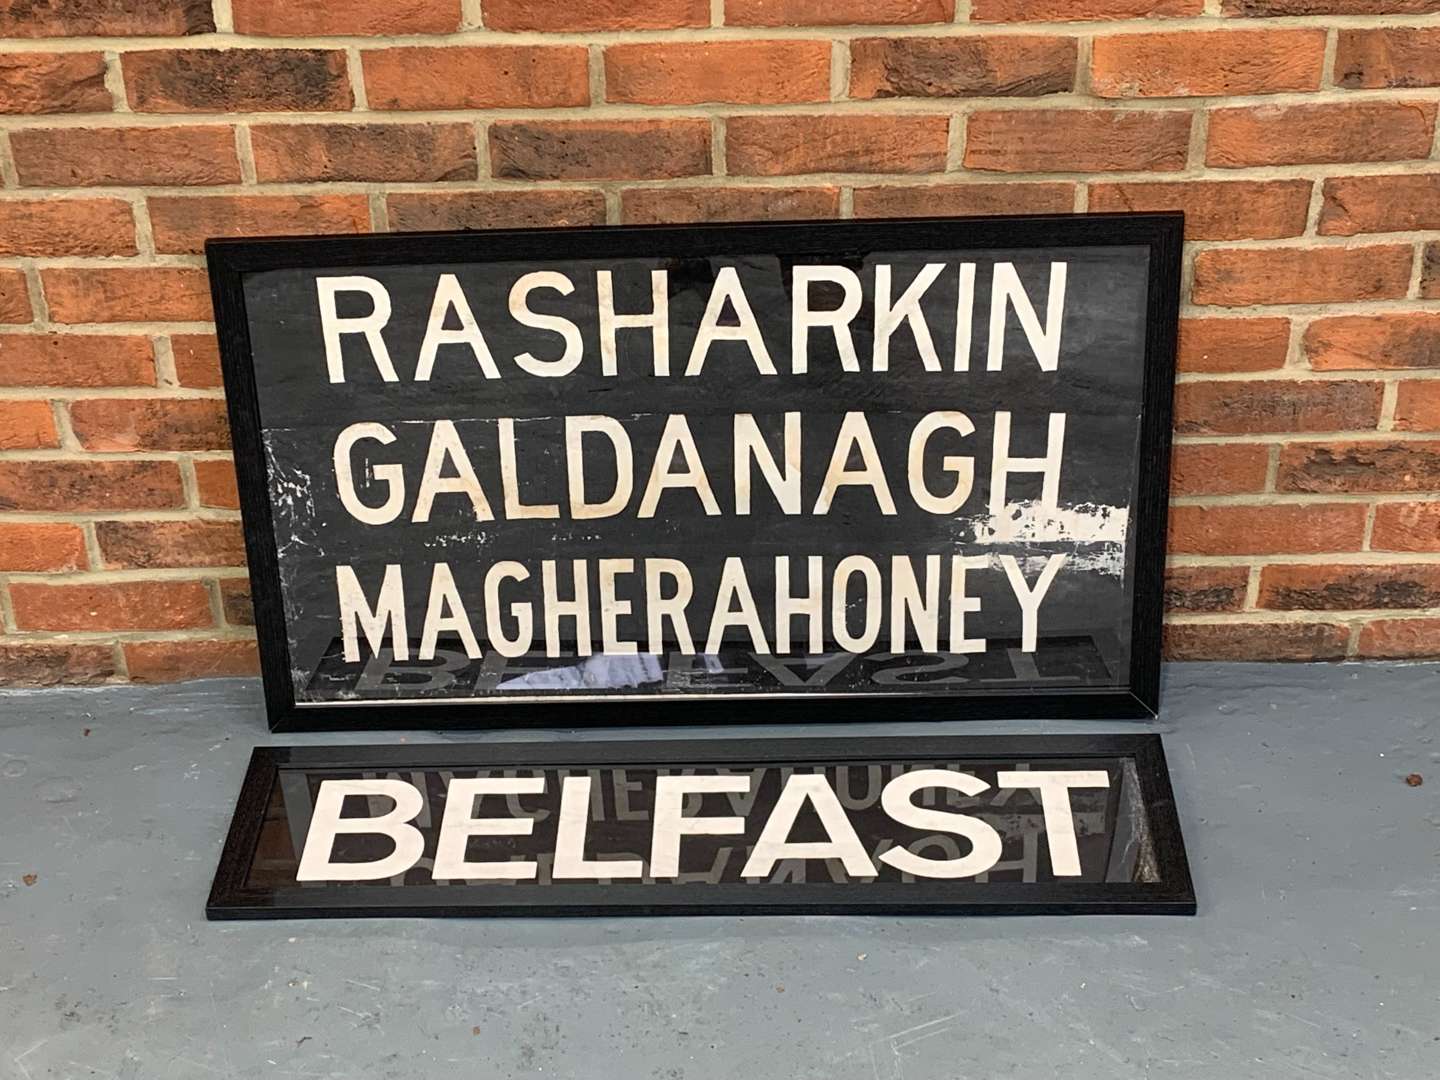 <p>Two Framed Northern Ireland Bus Destination Blinds</p>